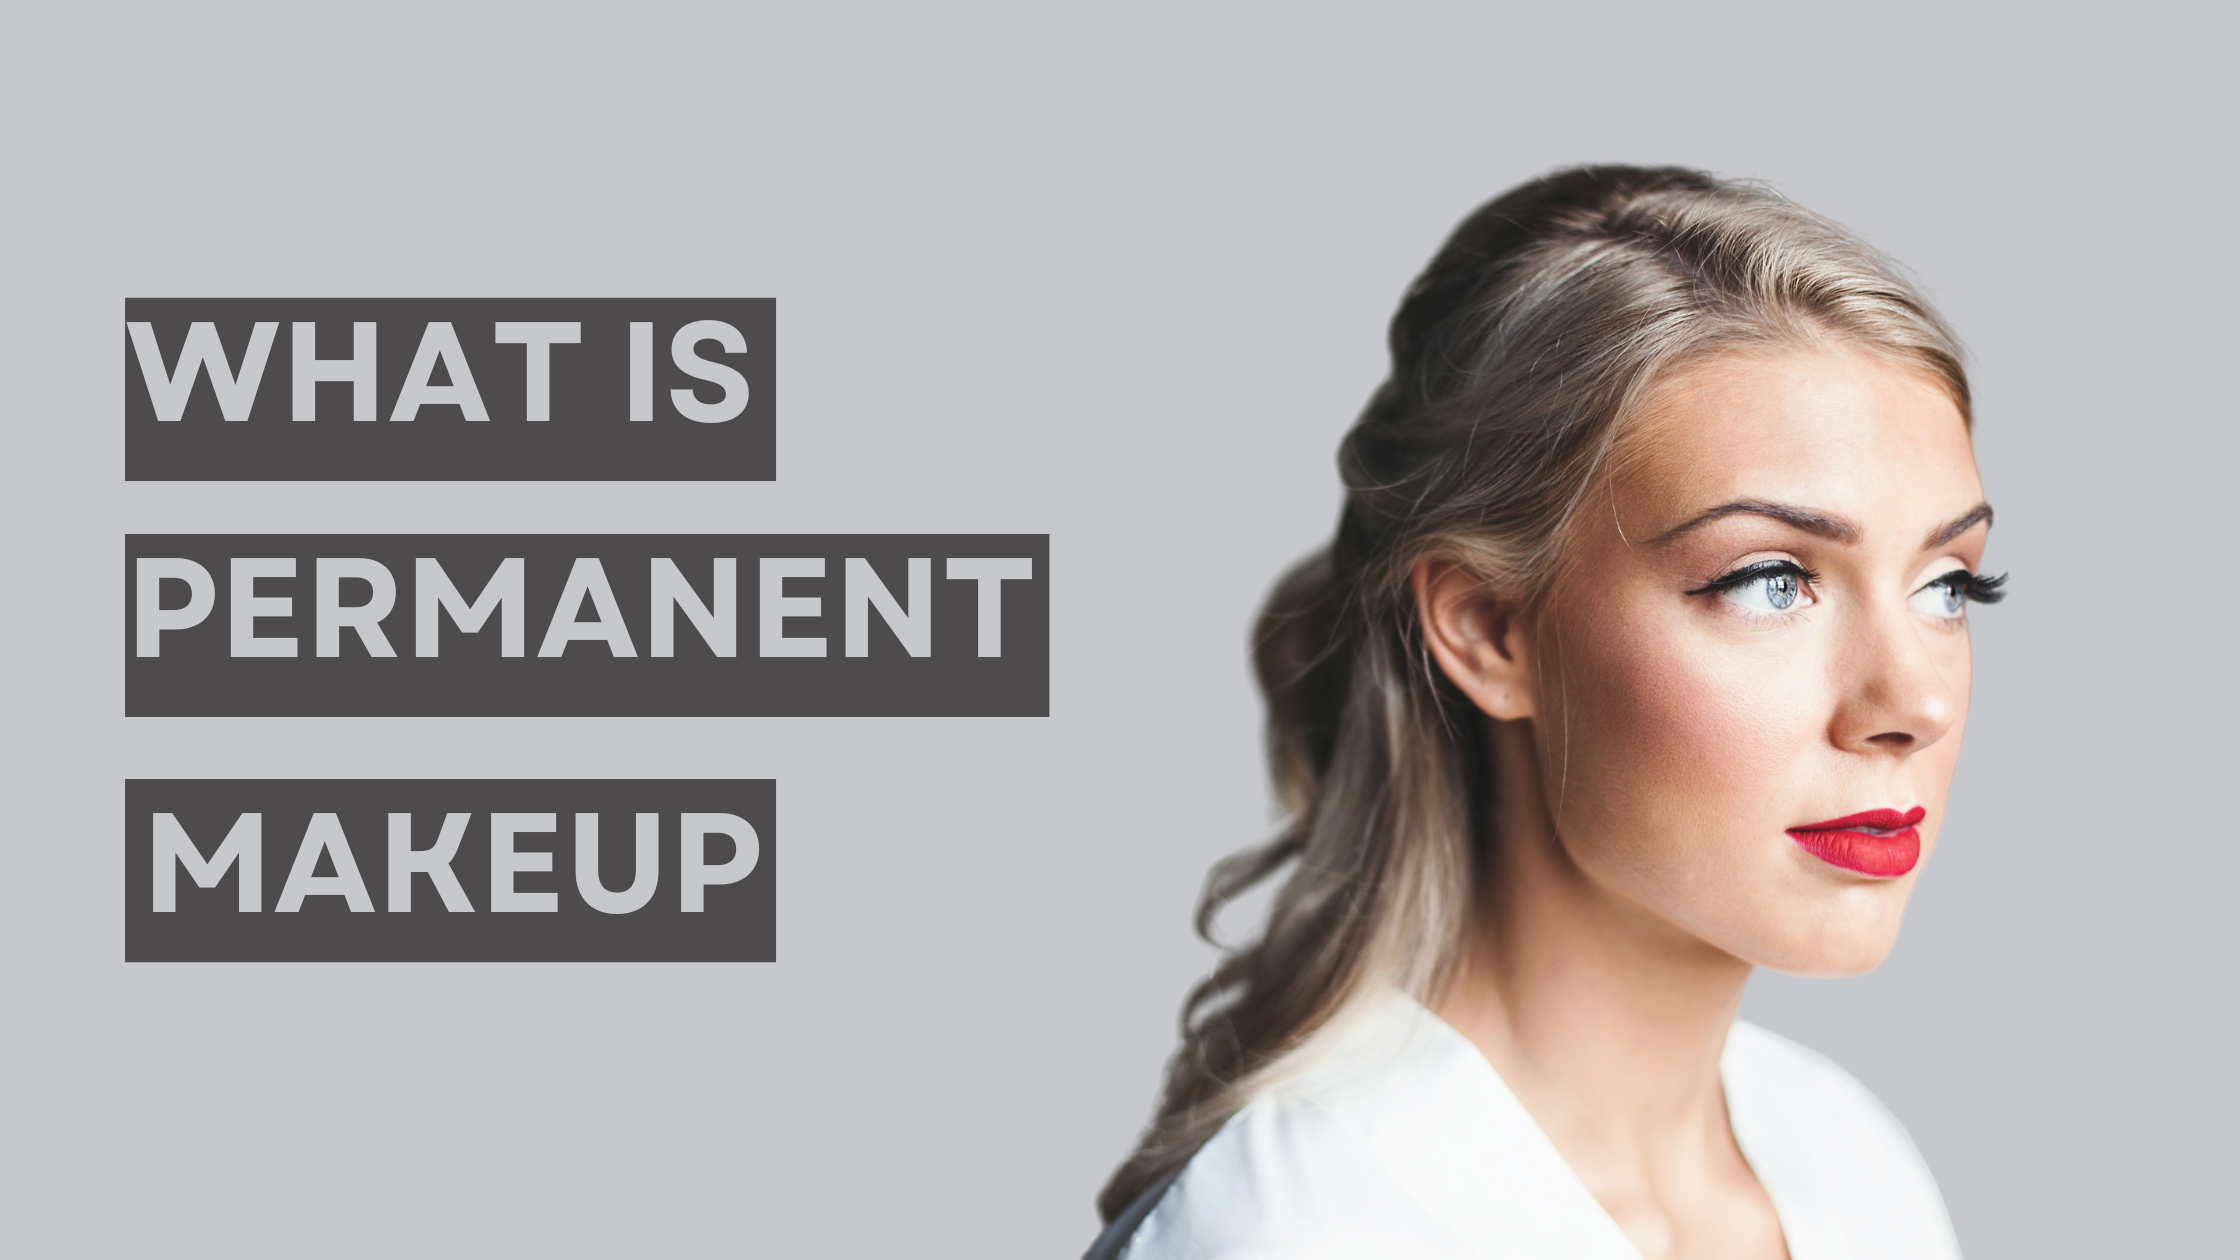 What is permanent makeup and how can I benefit